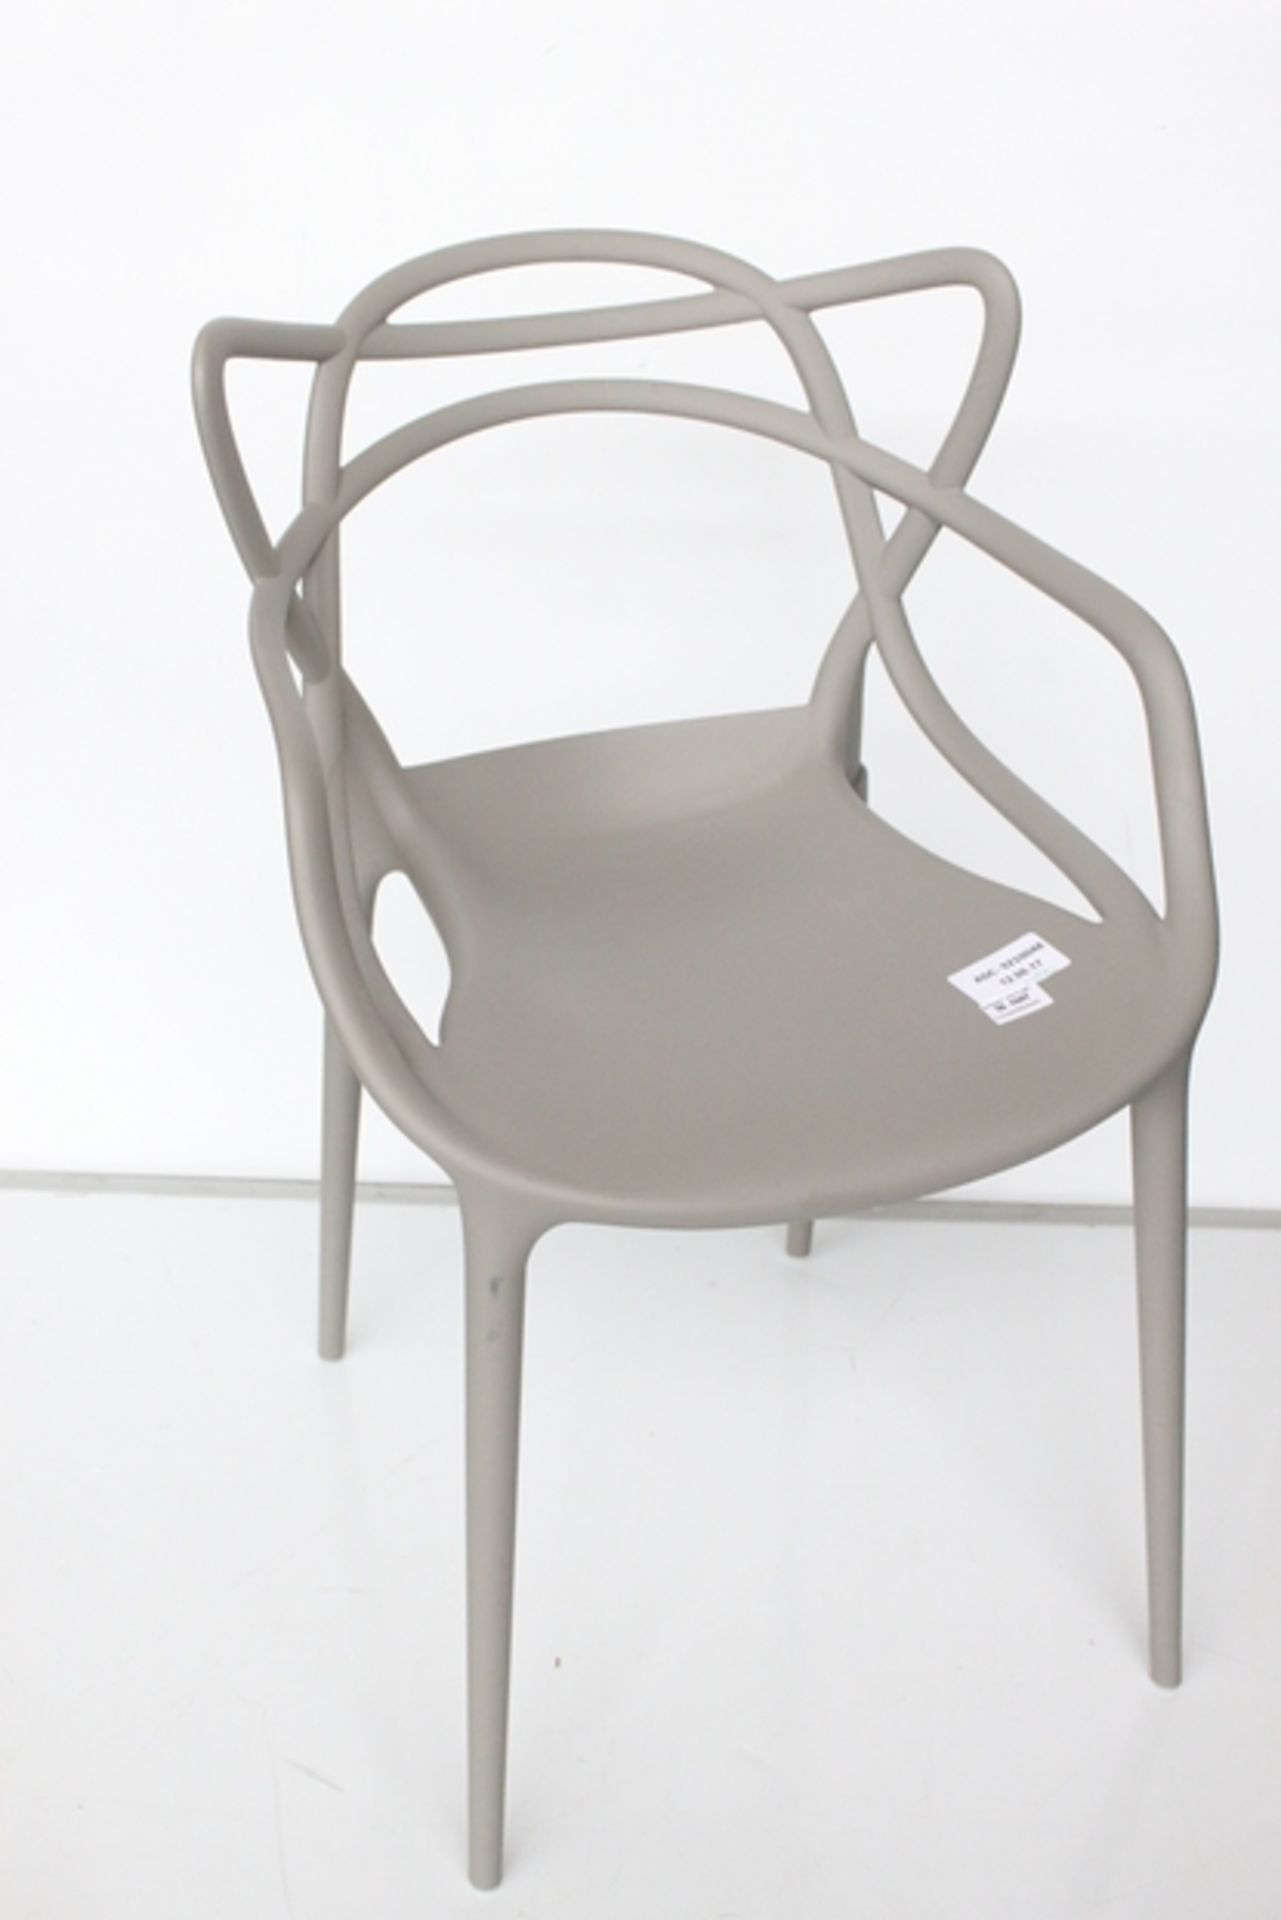 1 x KARTELL MASTERS CHAIR RRP £140 (12/06/17) *PLEASE NOTE THAT THE BID PRICE IS MULTIPLIED BY THE